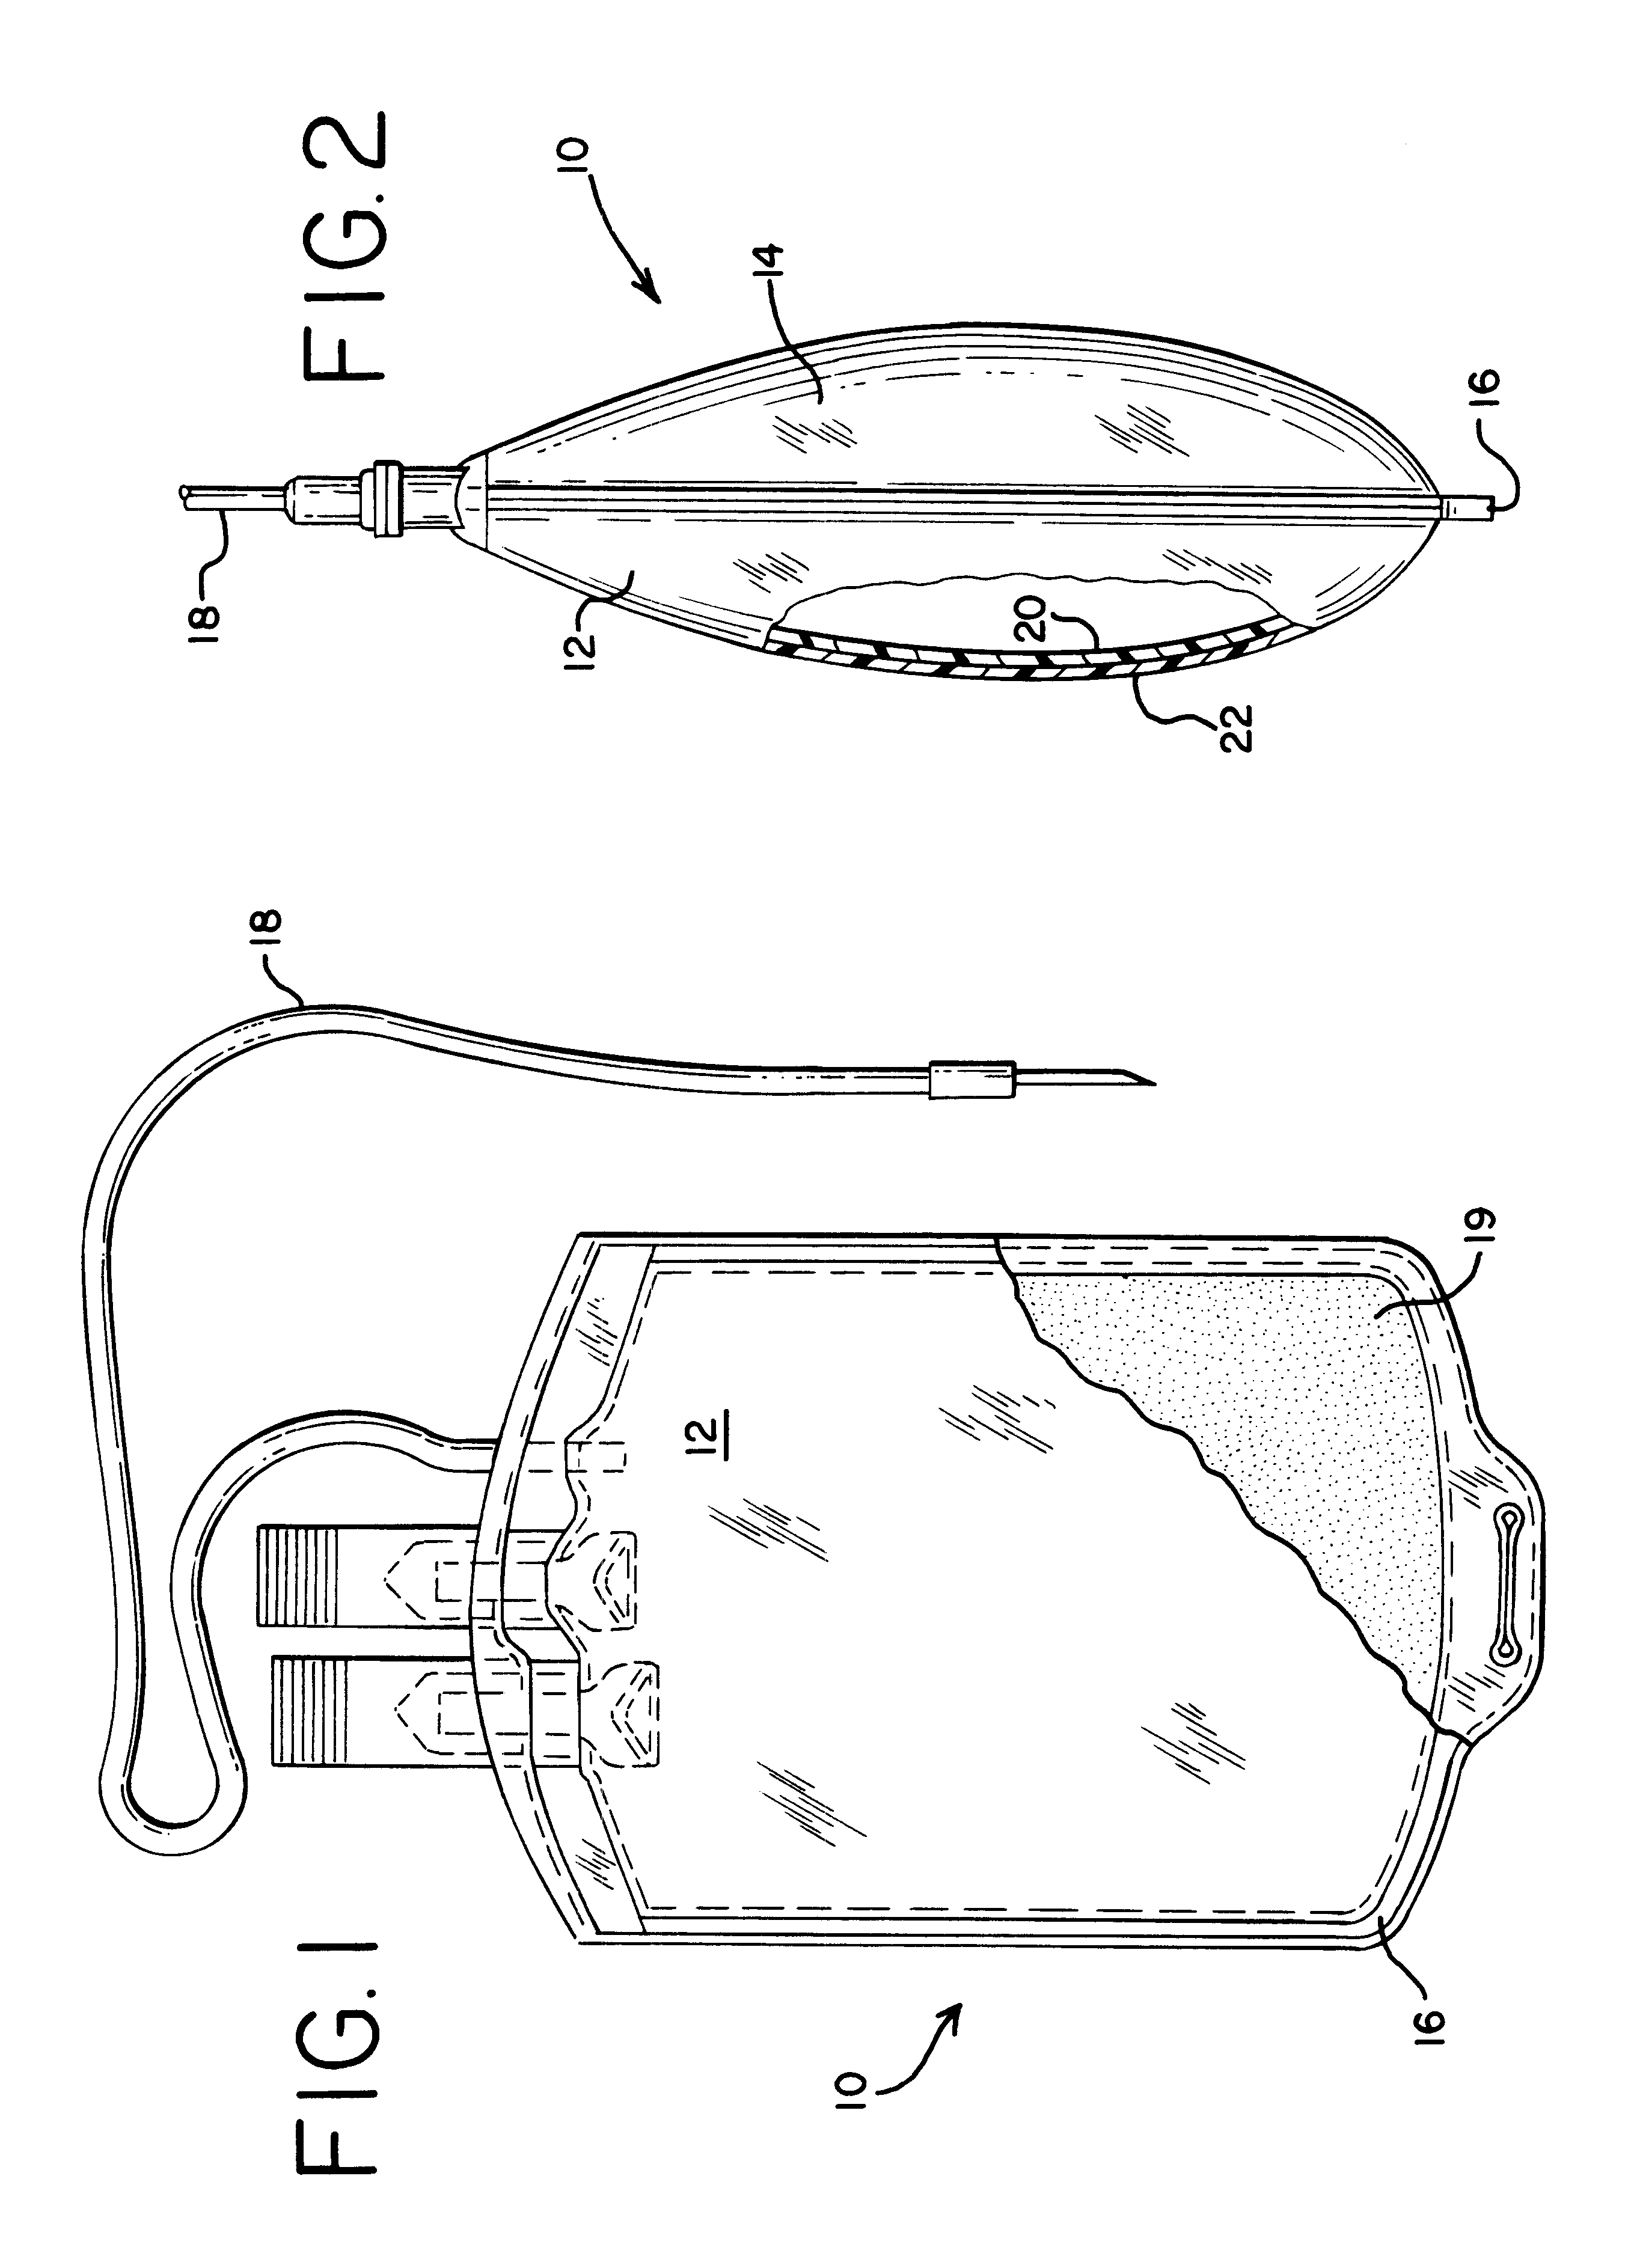 Plastic compositions including vitamin E for medical containers and methods for providing such compositions and containers